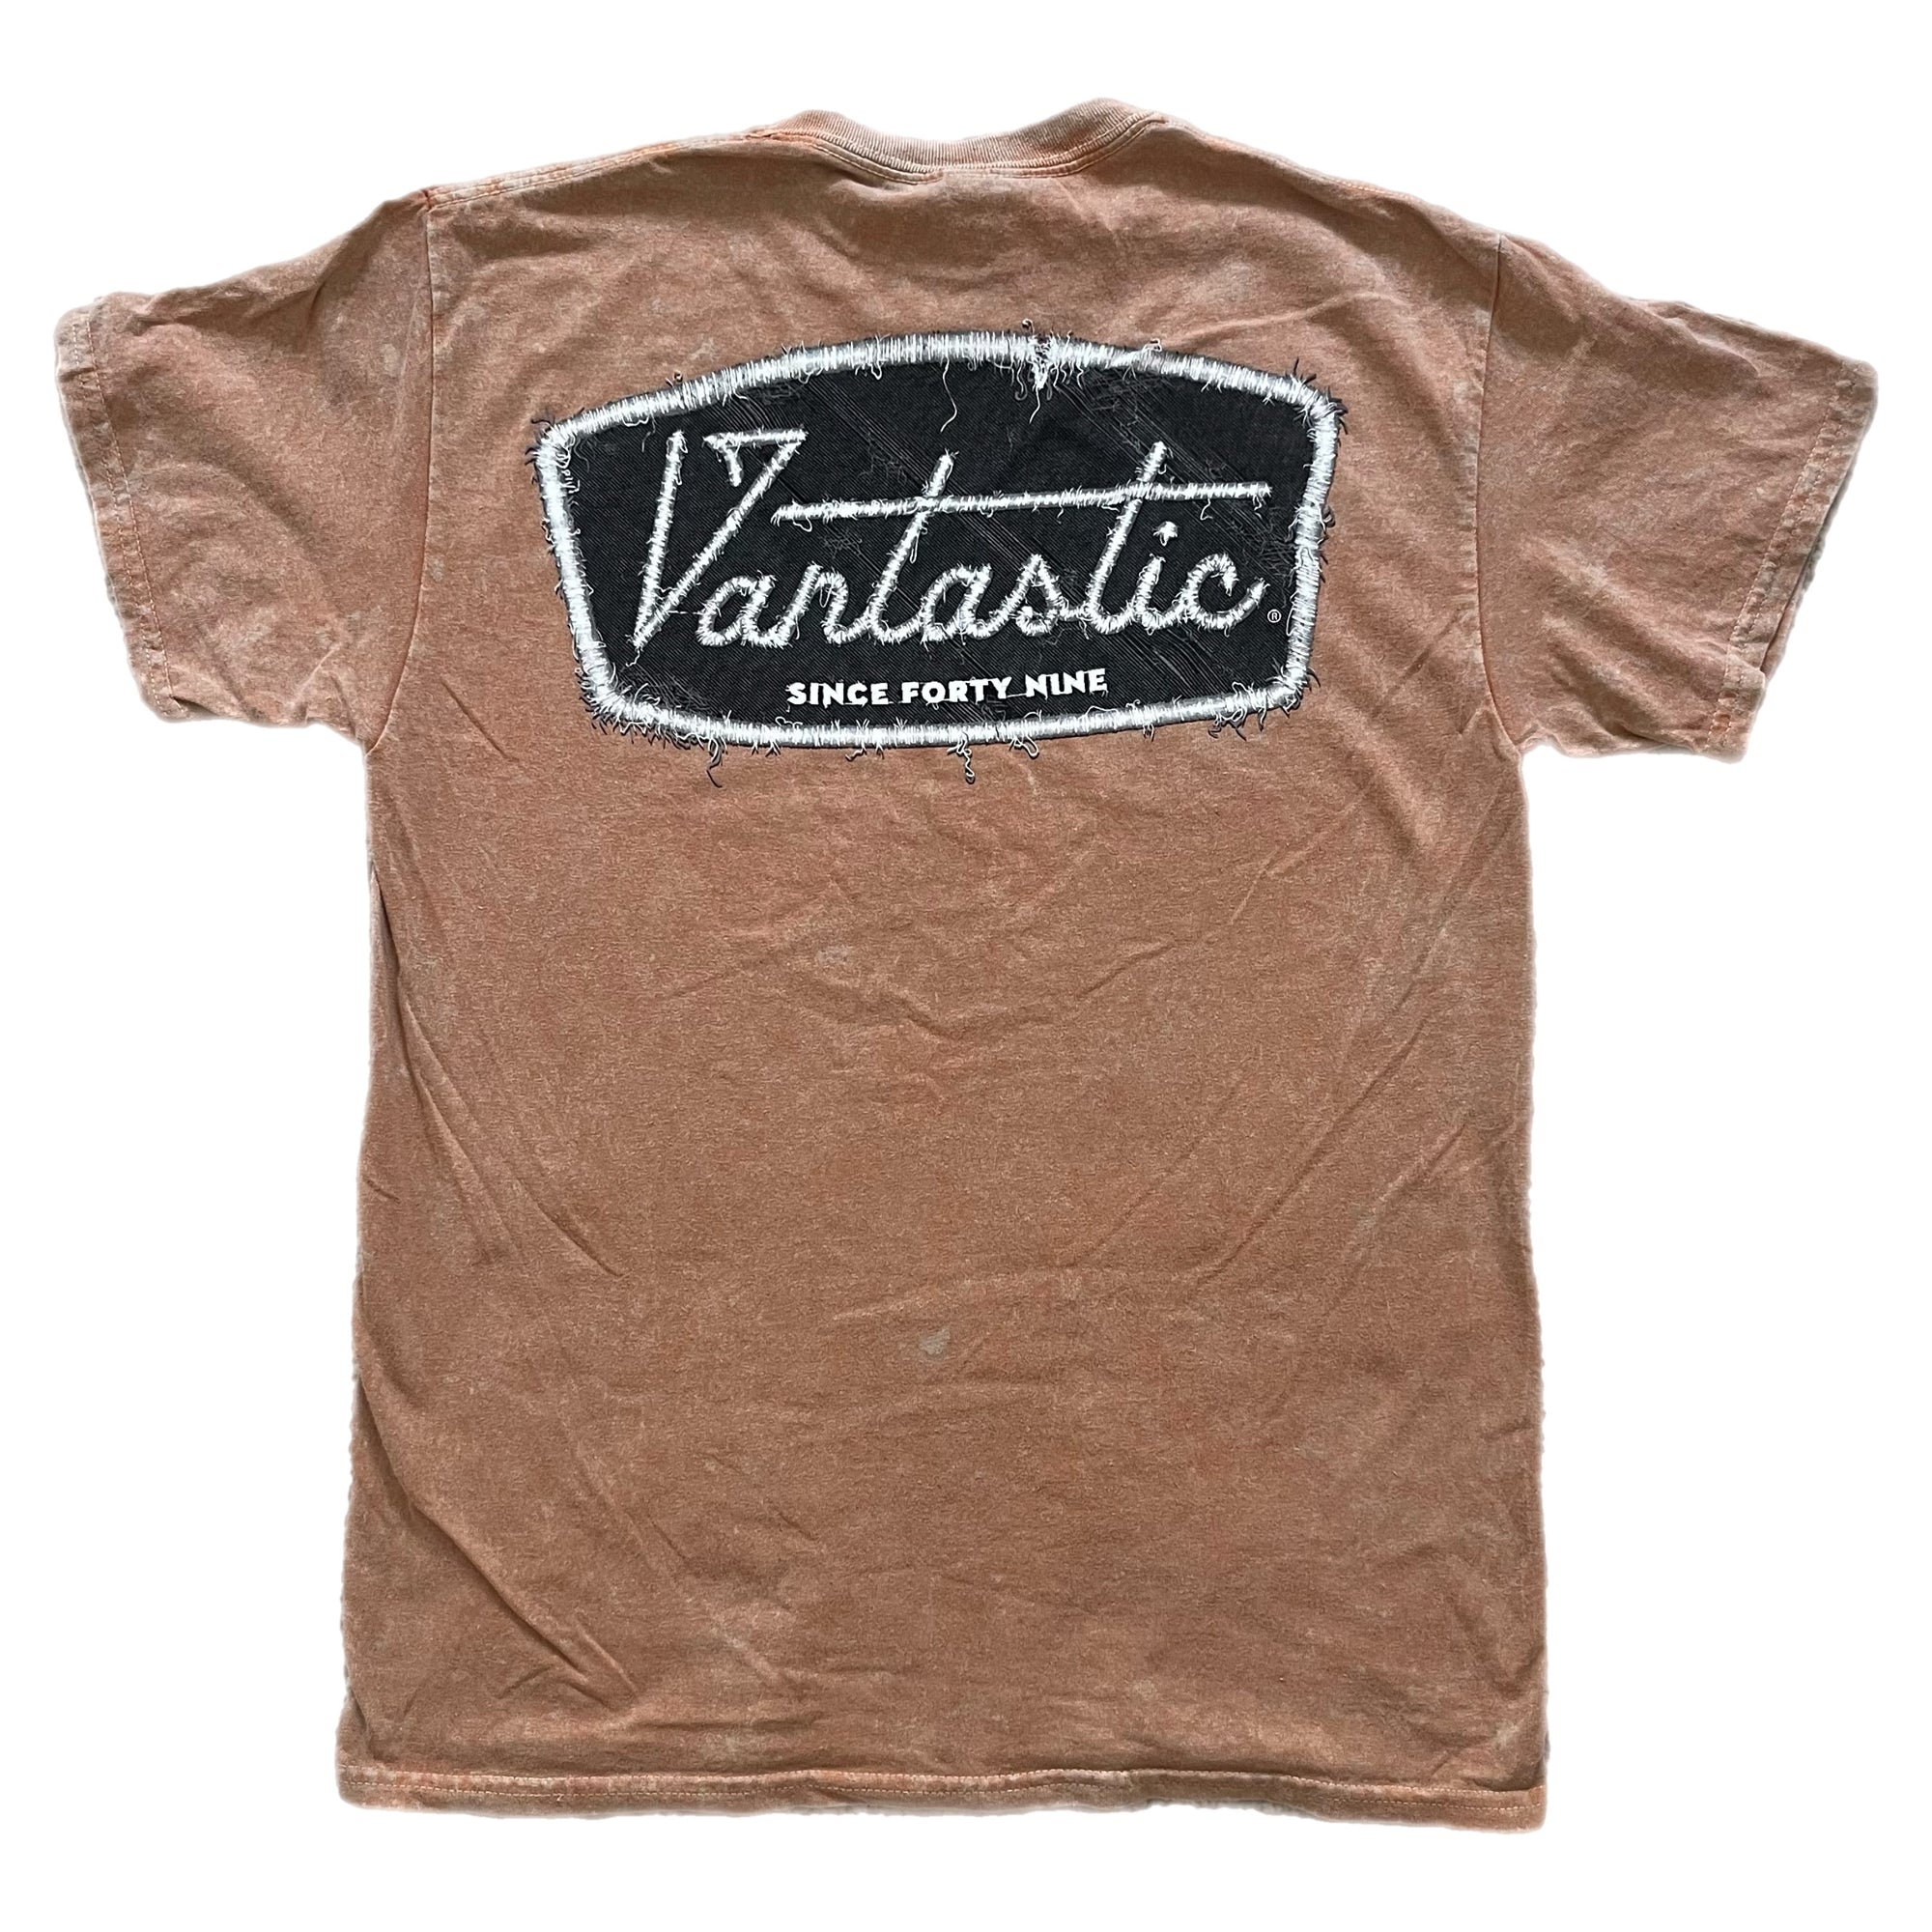 Vintage Deluxe T-shirt - Washed